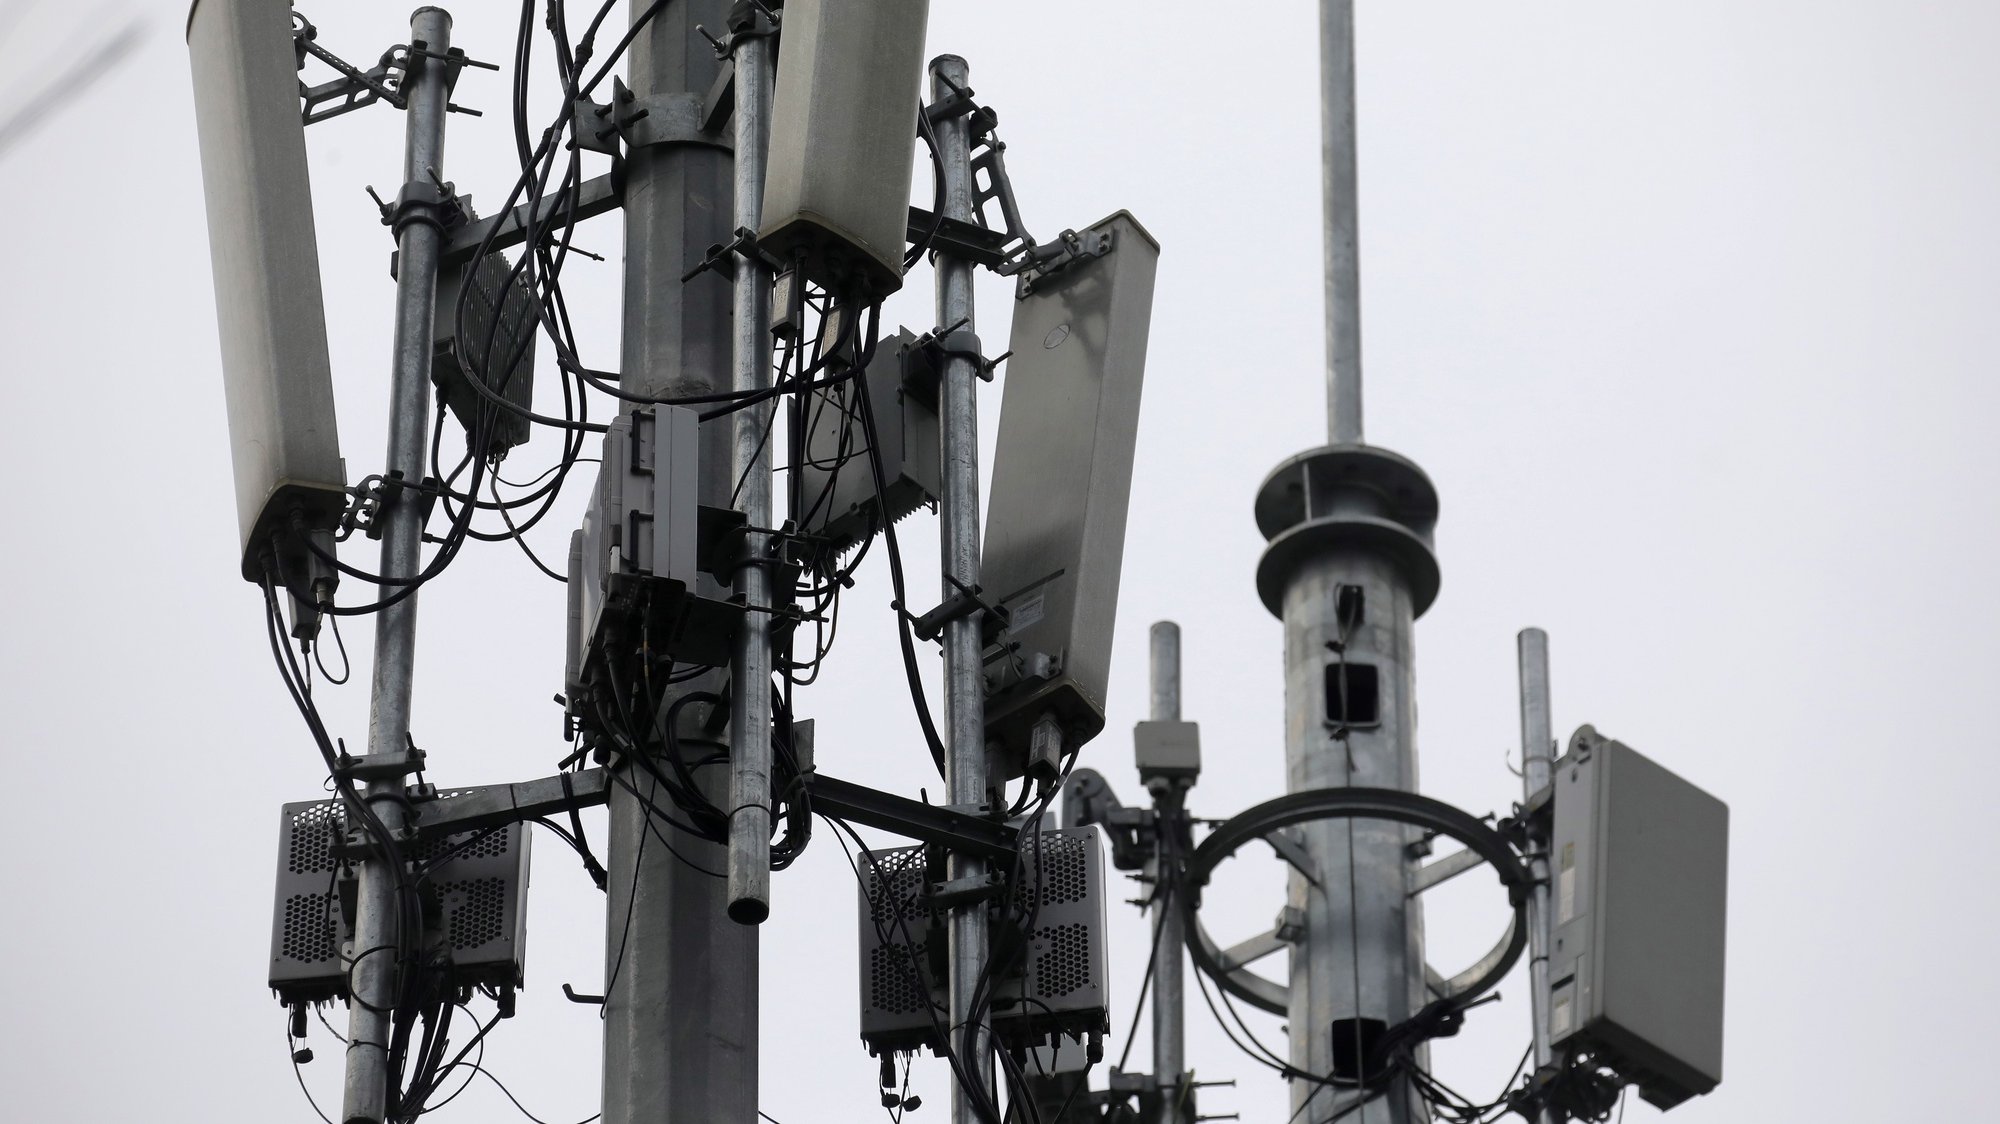 epa08692366 A cellphone tower equipped with 5G on a street in Beijing, China, 23 September 2020 (issued 24 September 2020). Beijing authorities said on 22 September that there were now 5.06 million 5G users in the city, after the technology was launched in 2019, according to Chinese state media. More than 50,000 5G base stations are expected to be installed in Beijing by the end of the year, with 44,000 already in operation as of August 2020.  EPA/WU HONG